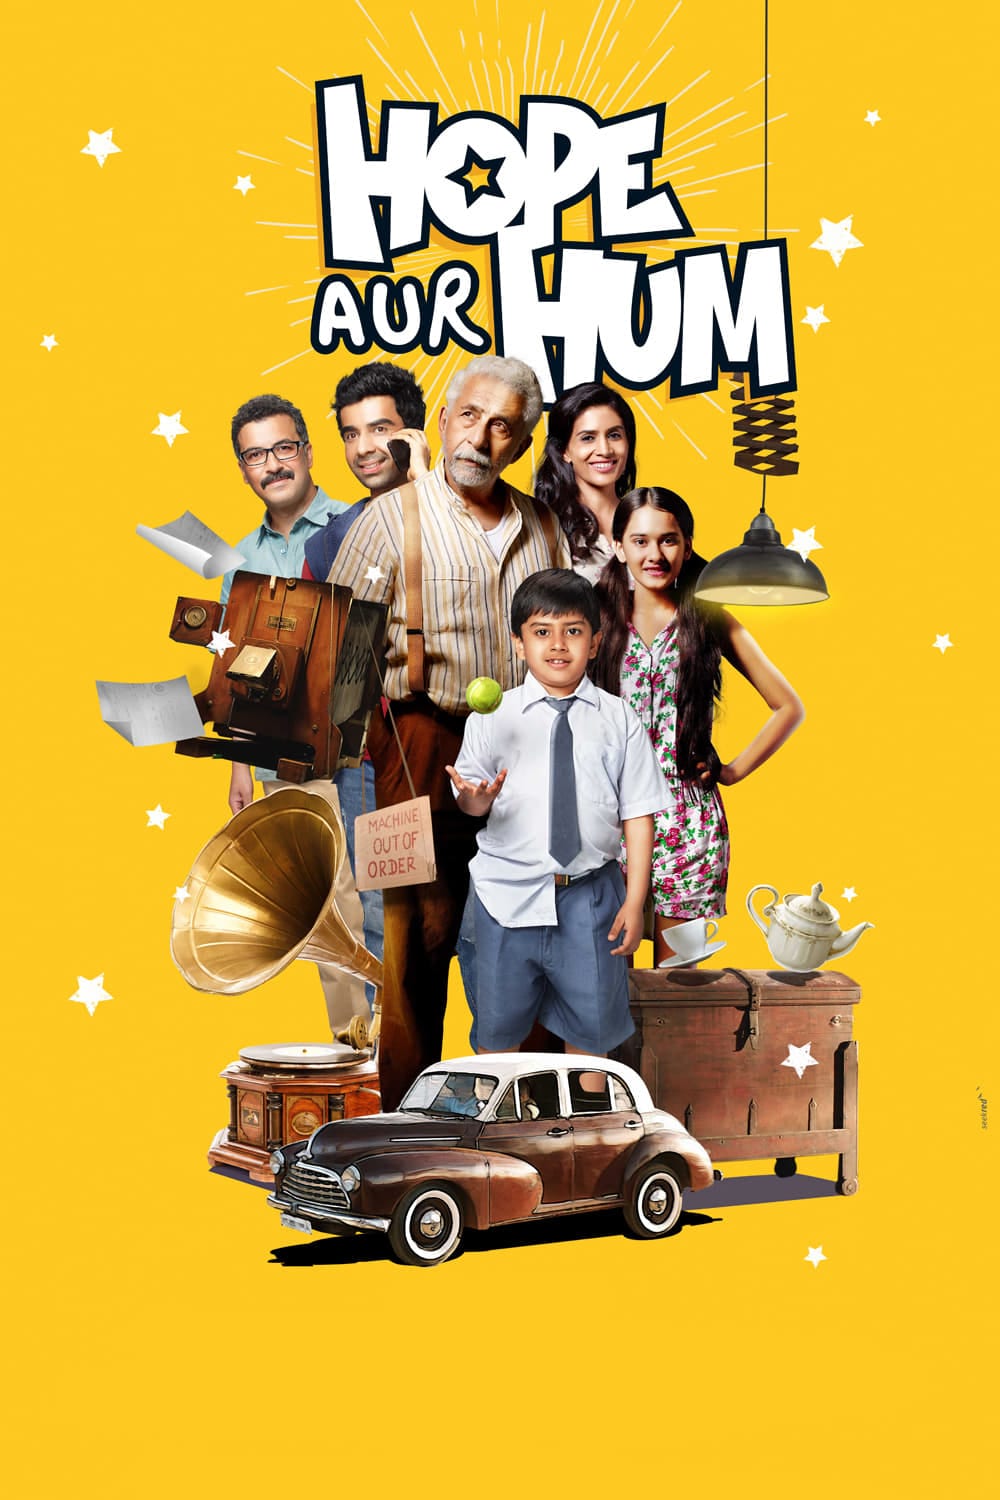 Poster for the movie "Hope Aur Hum"